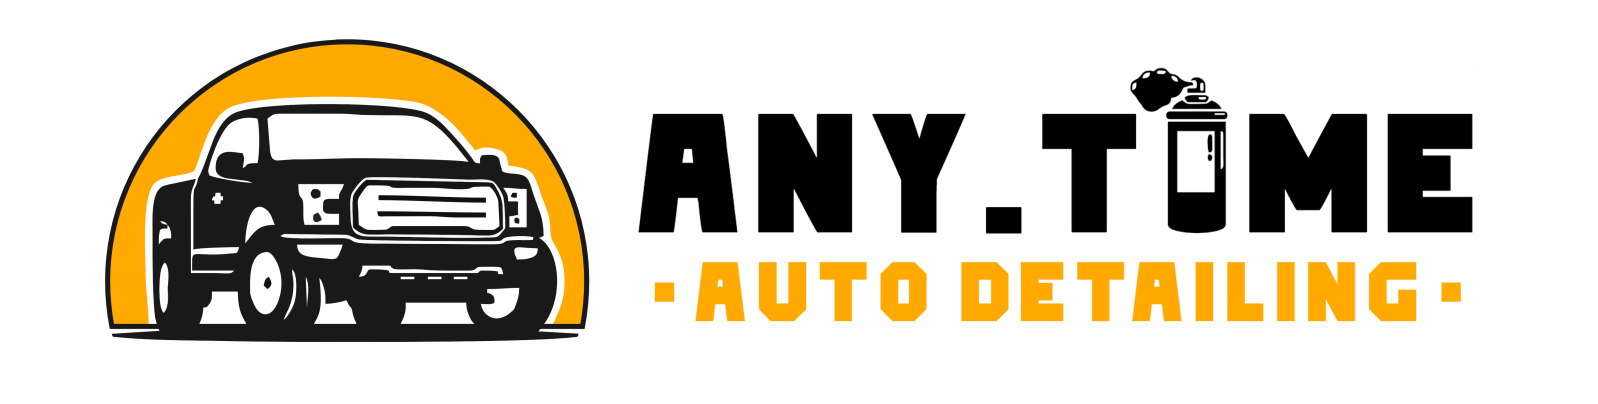 AnyTime Auto Detailing